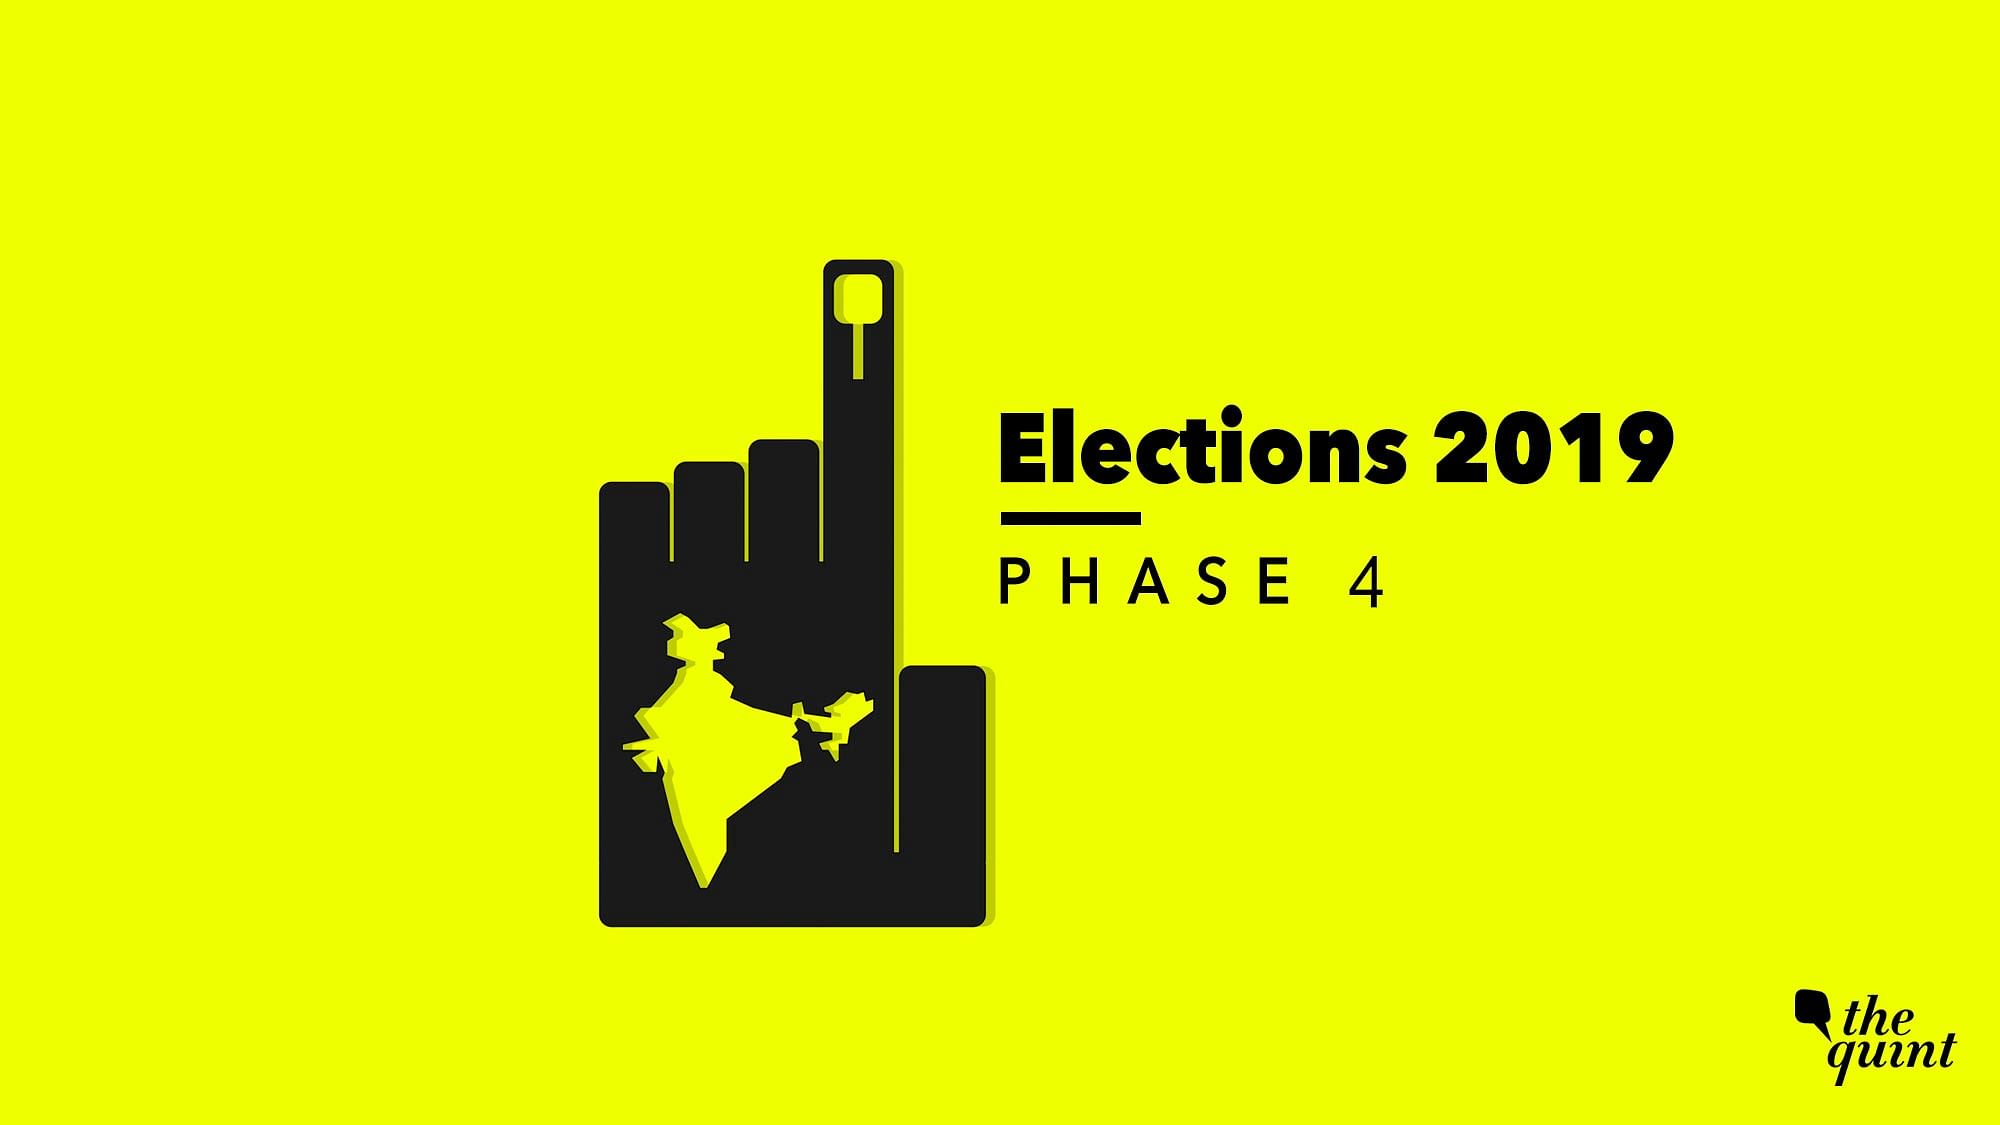 Here’s a full list of constituencies voting in the phase 4 of Lok Sabha elections.